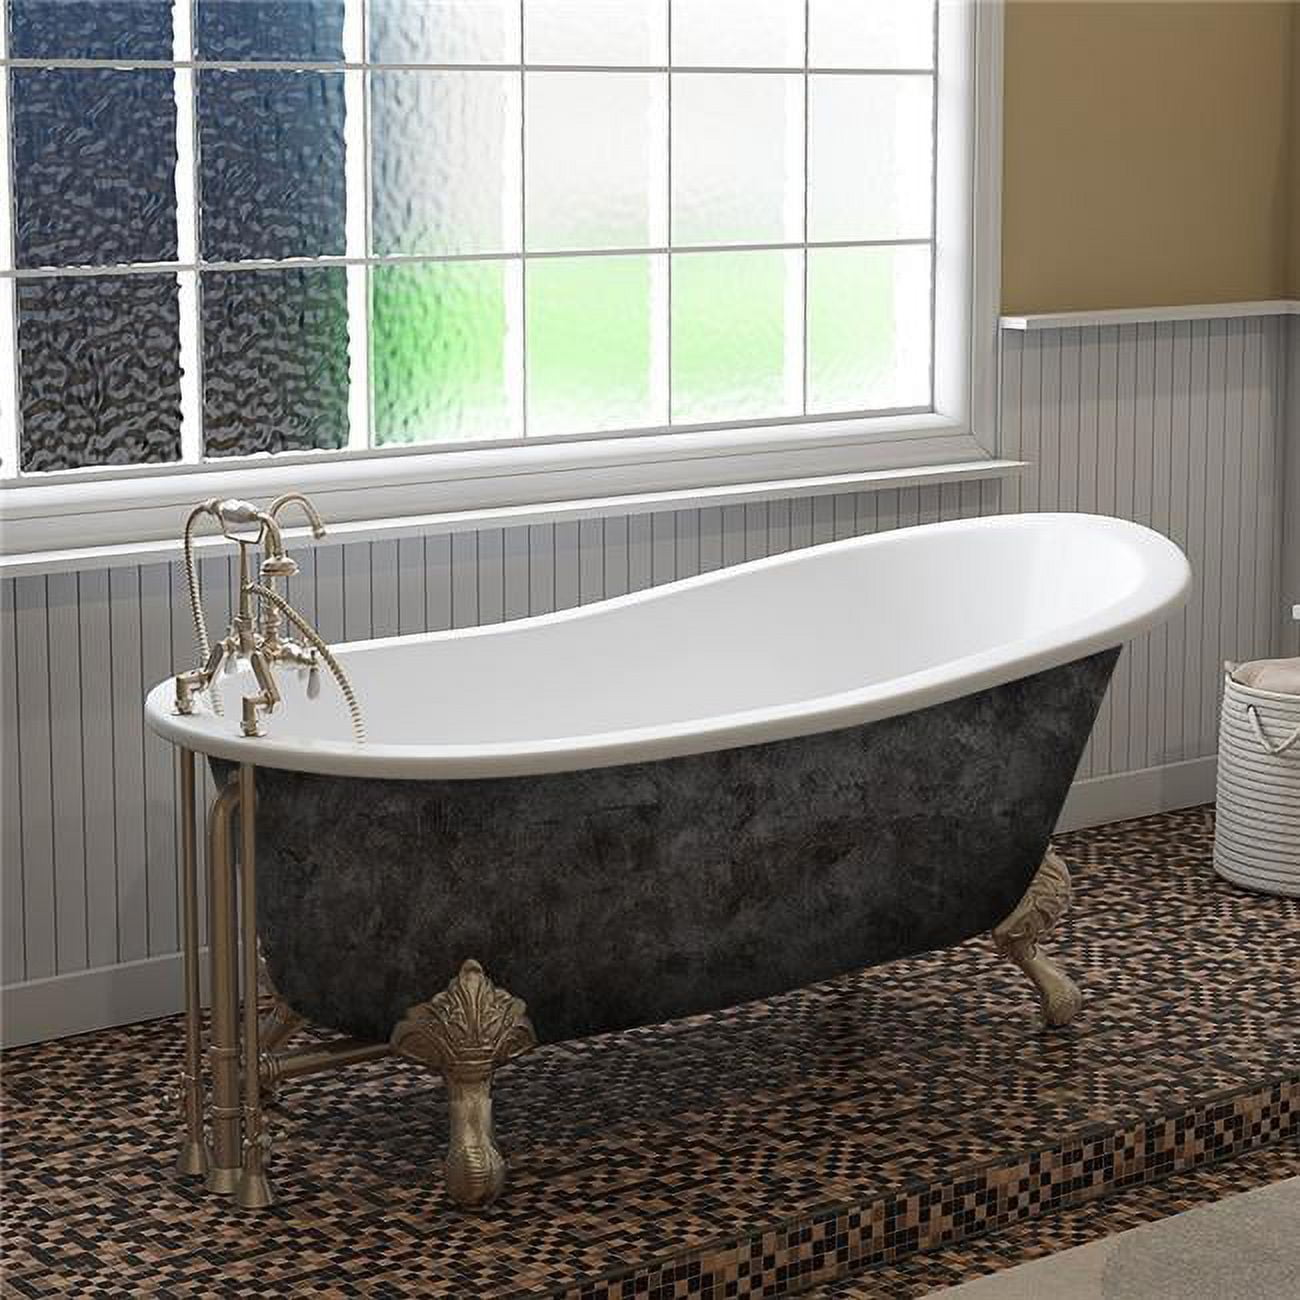 St67-dh-bn-sp 67 In. X 30 In. Scorched Platinum Cast Iron Slipper Bathtub With 7 In. Deck Mount Faucet Holes & Brushed Nickel Ball & Claw Feet